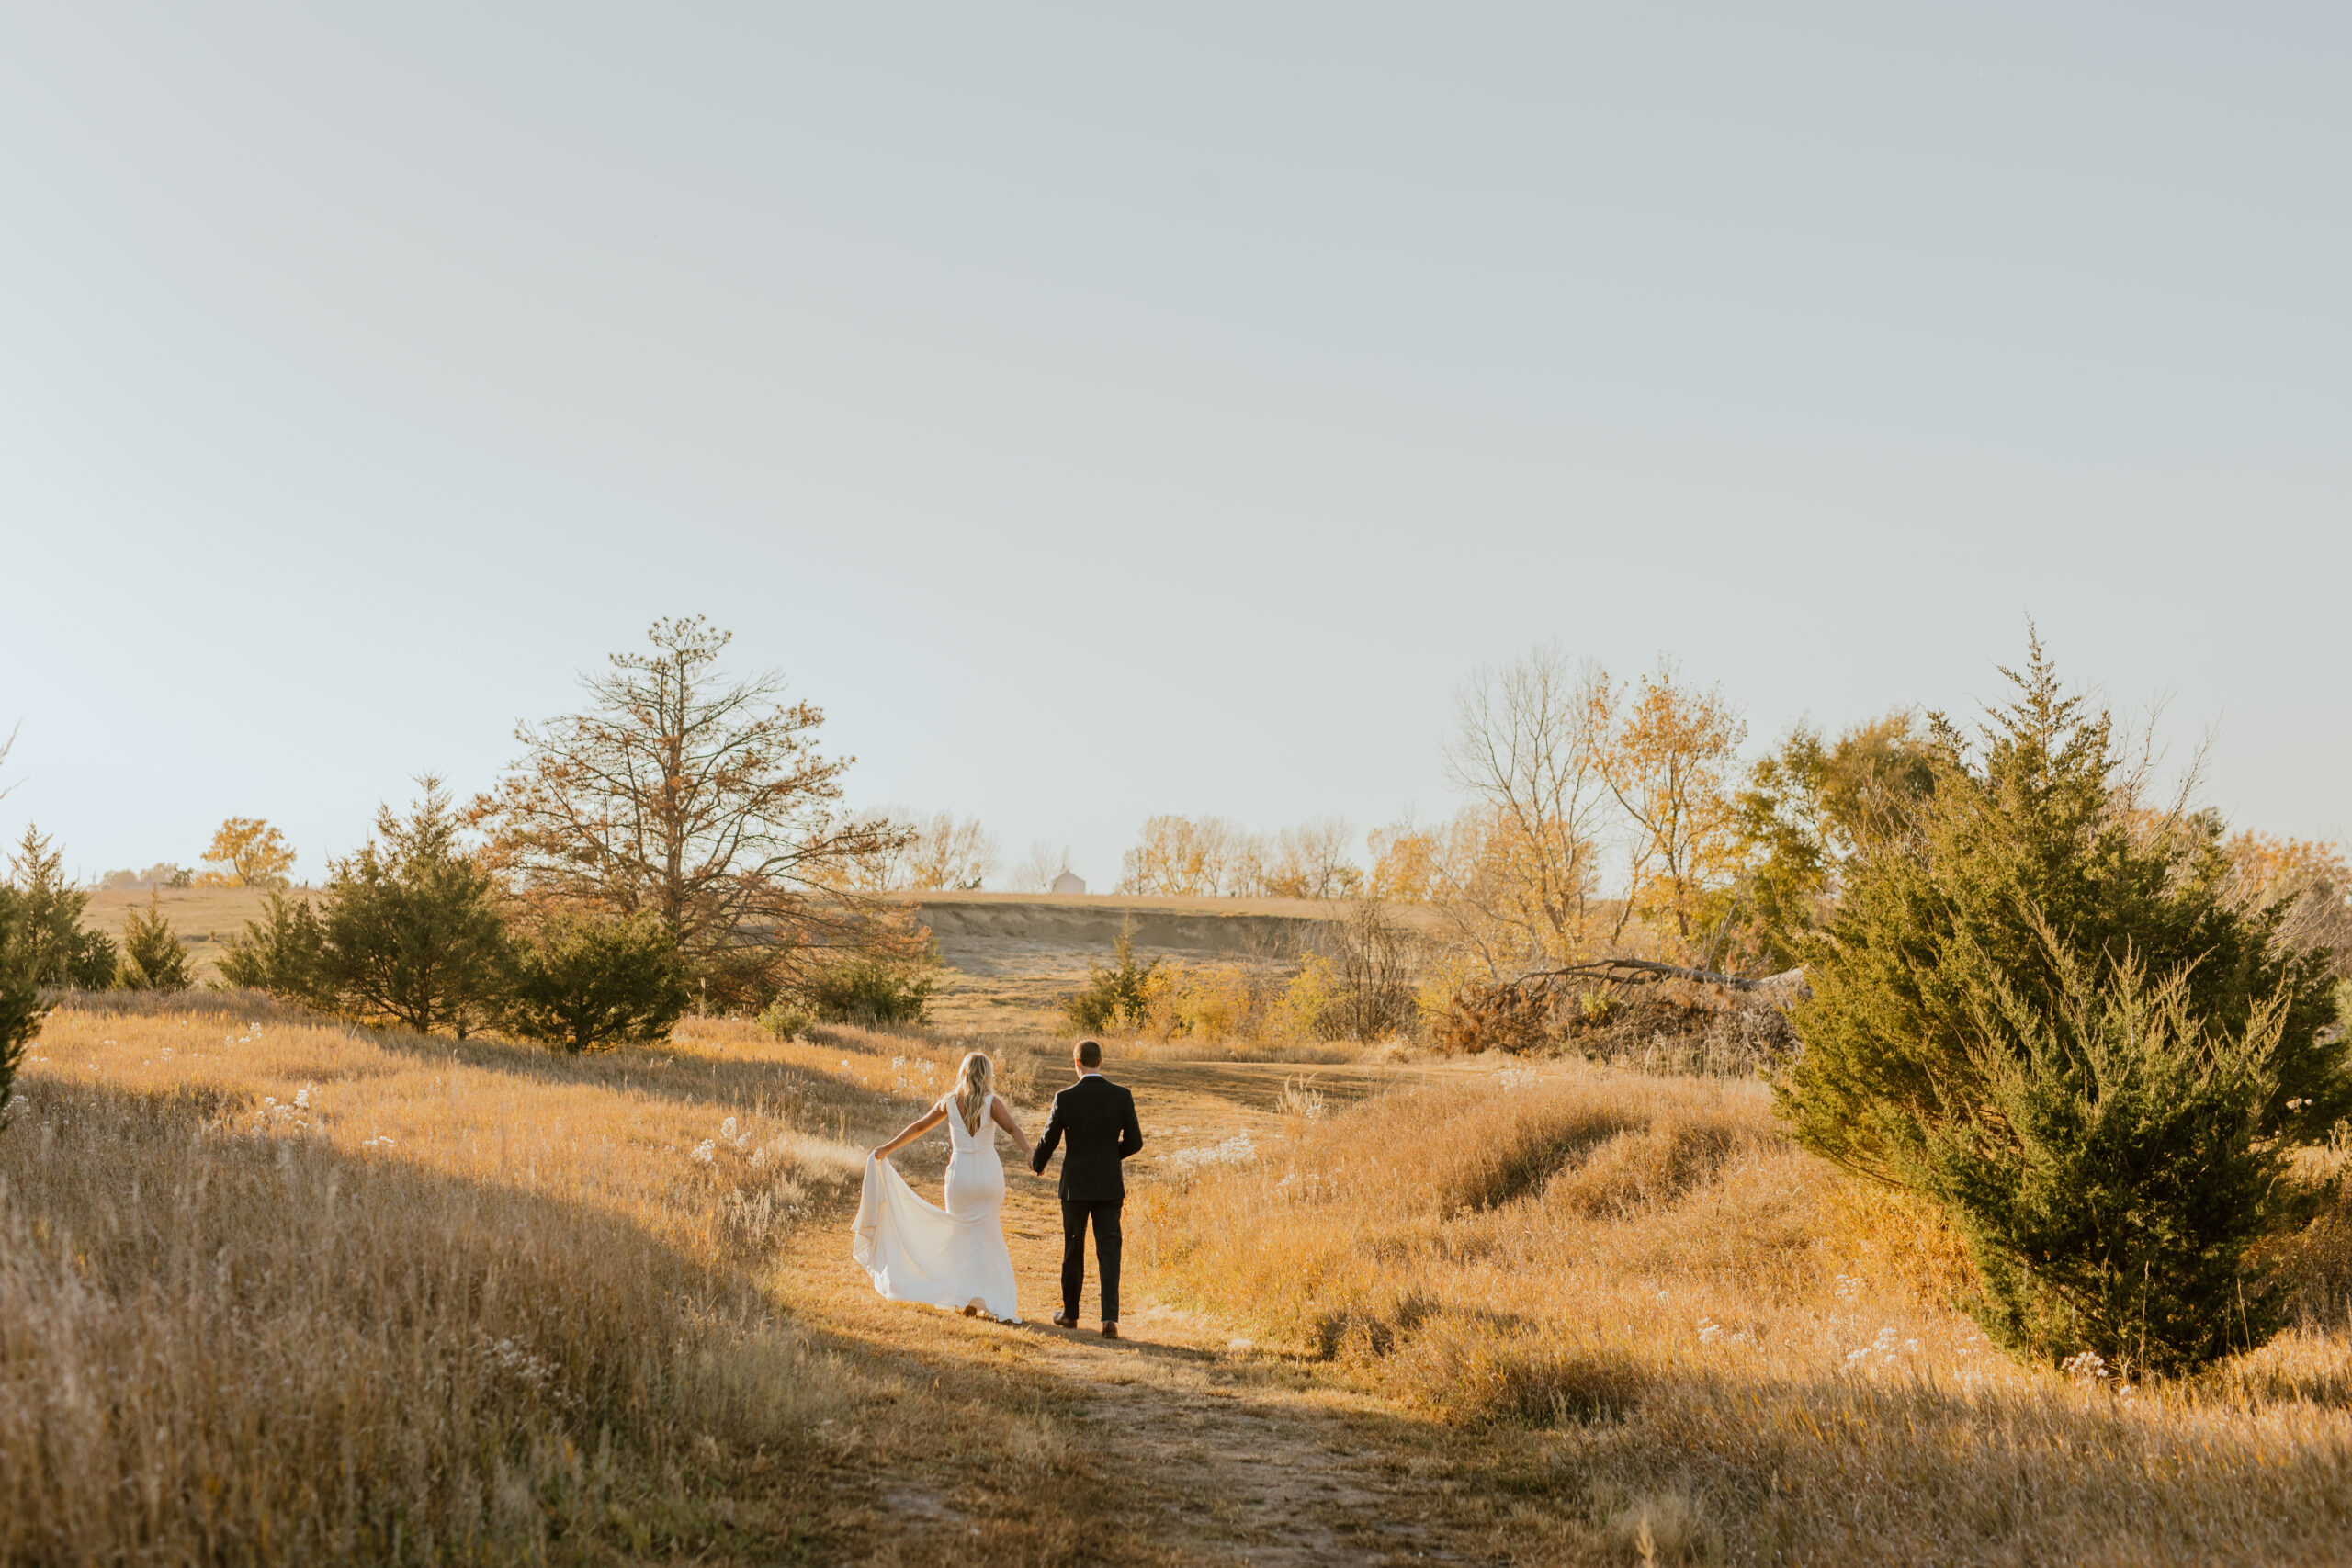 bride and groom walking down a dirt path into the distance as the wedding photographer captures their wedding day